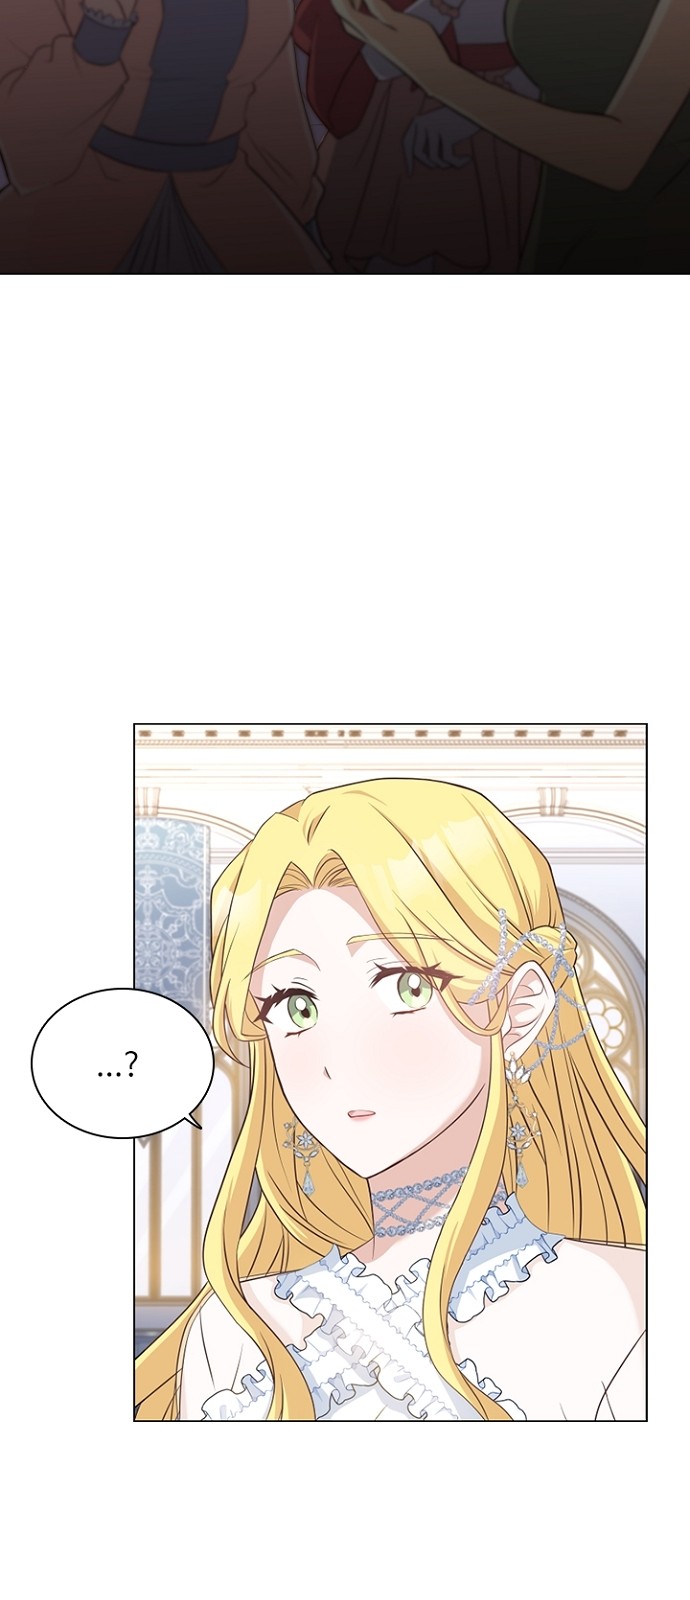 His Majesty's Proposal (A Night With the Emperor) - Chapter 34 - Page 70